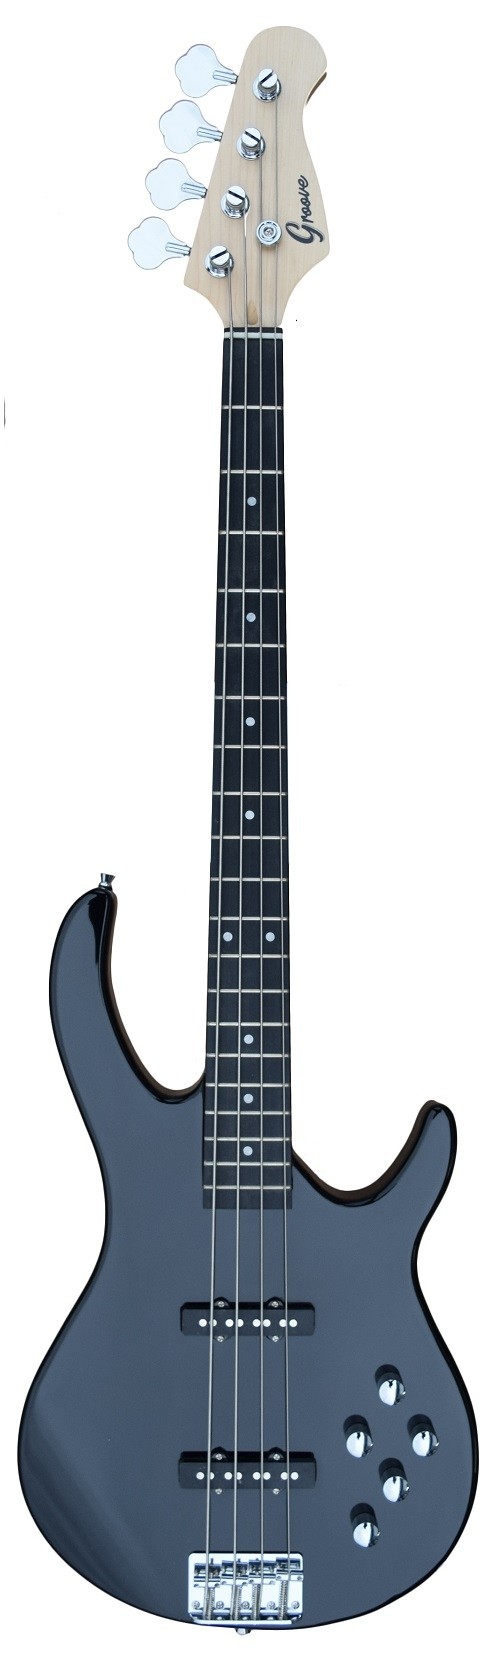 Bass Guitar 4 Strings with Jazz Pickups into Black Color